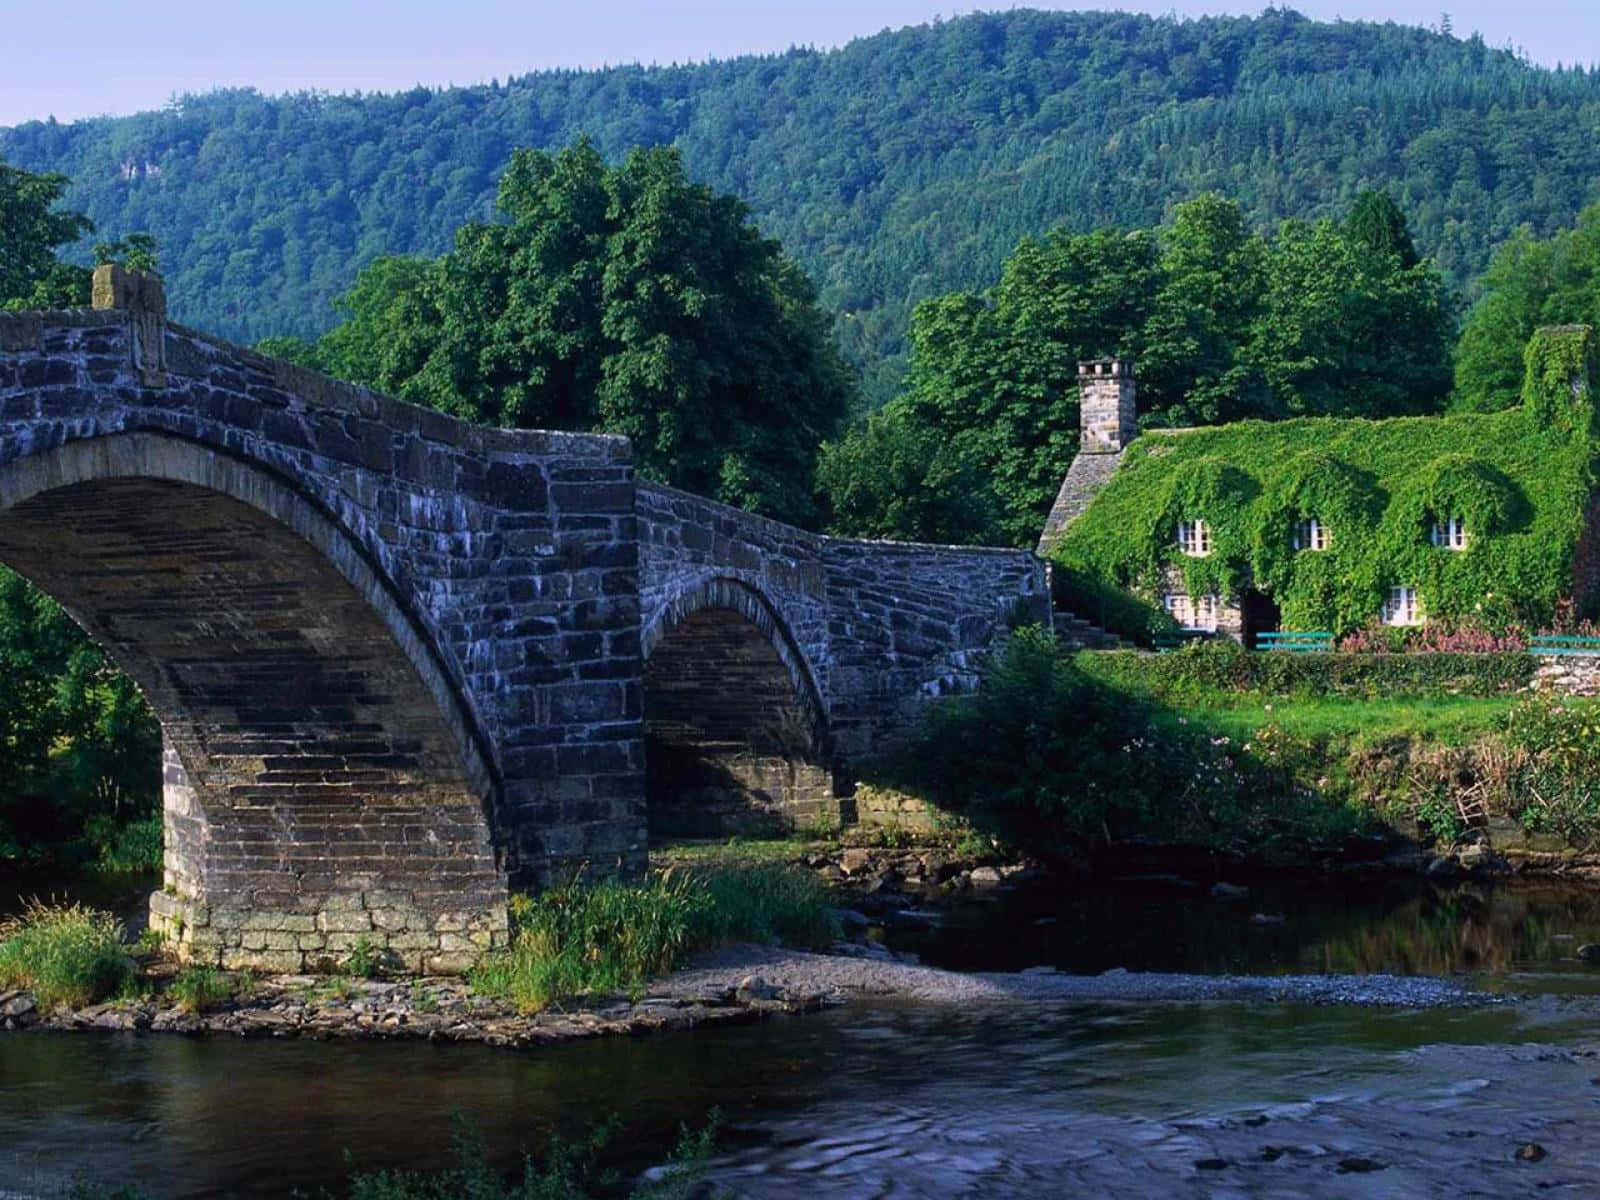 a stone bridge over a river with a house on it